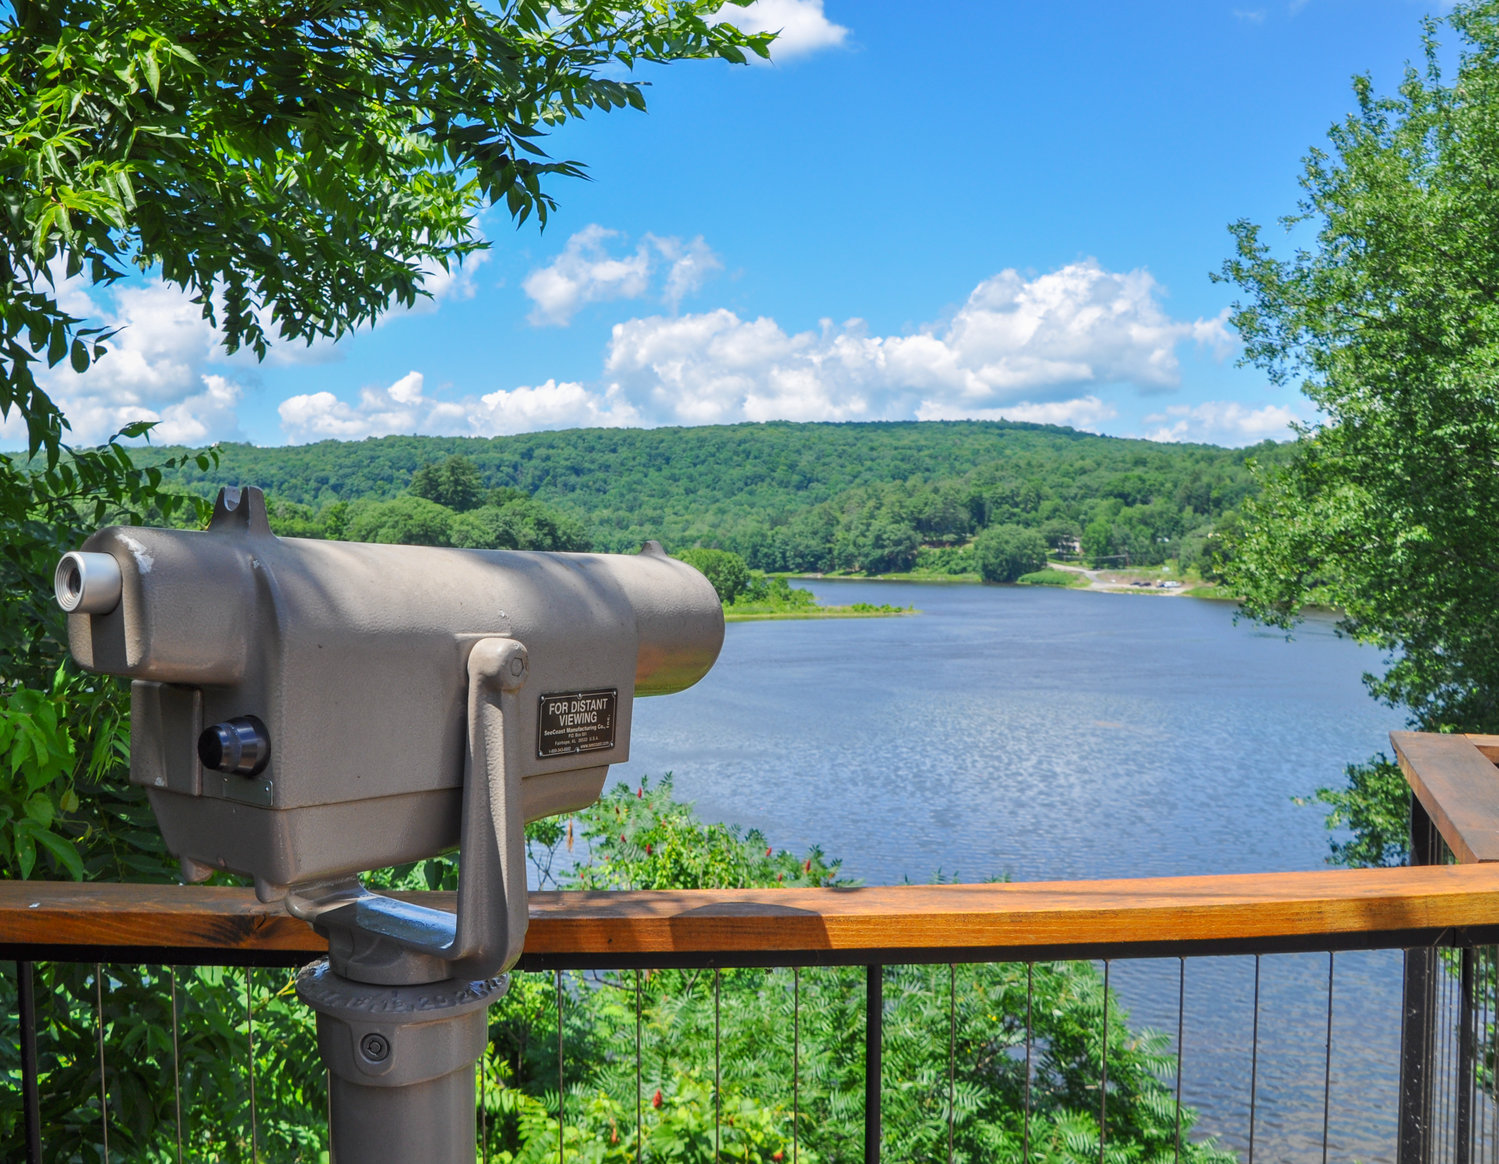 Famous for its magnificent views and historic ambiance, Narrowsburg, NY is home to a healthy population of bald eagles, often spotted from the deck overlooking the beautiful Delaware River.